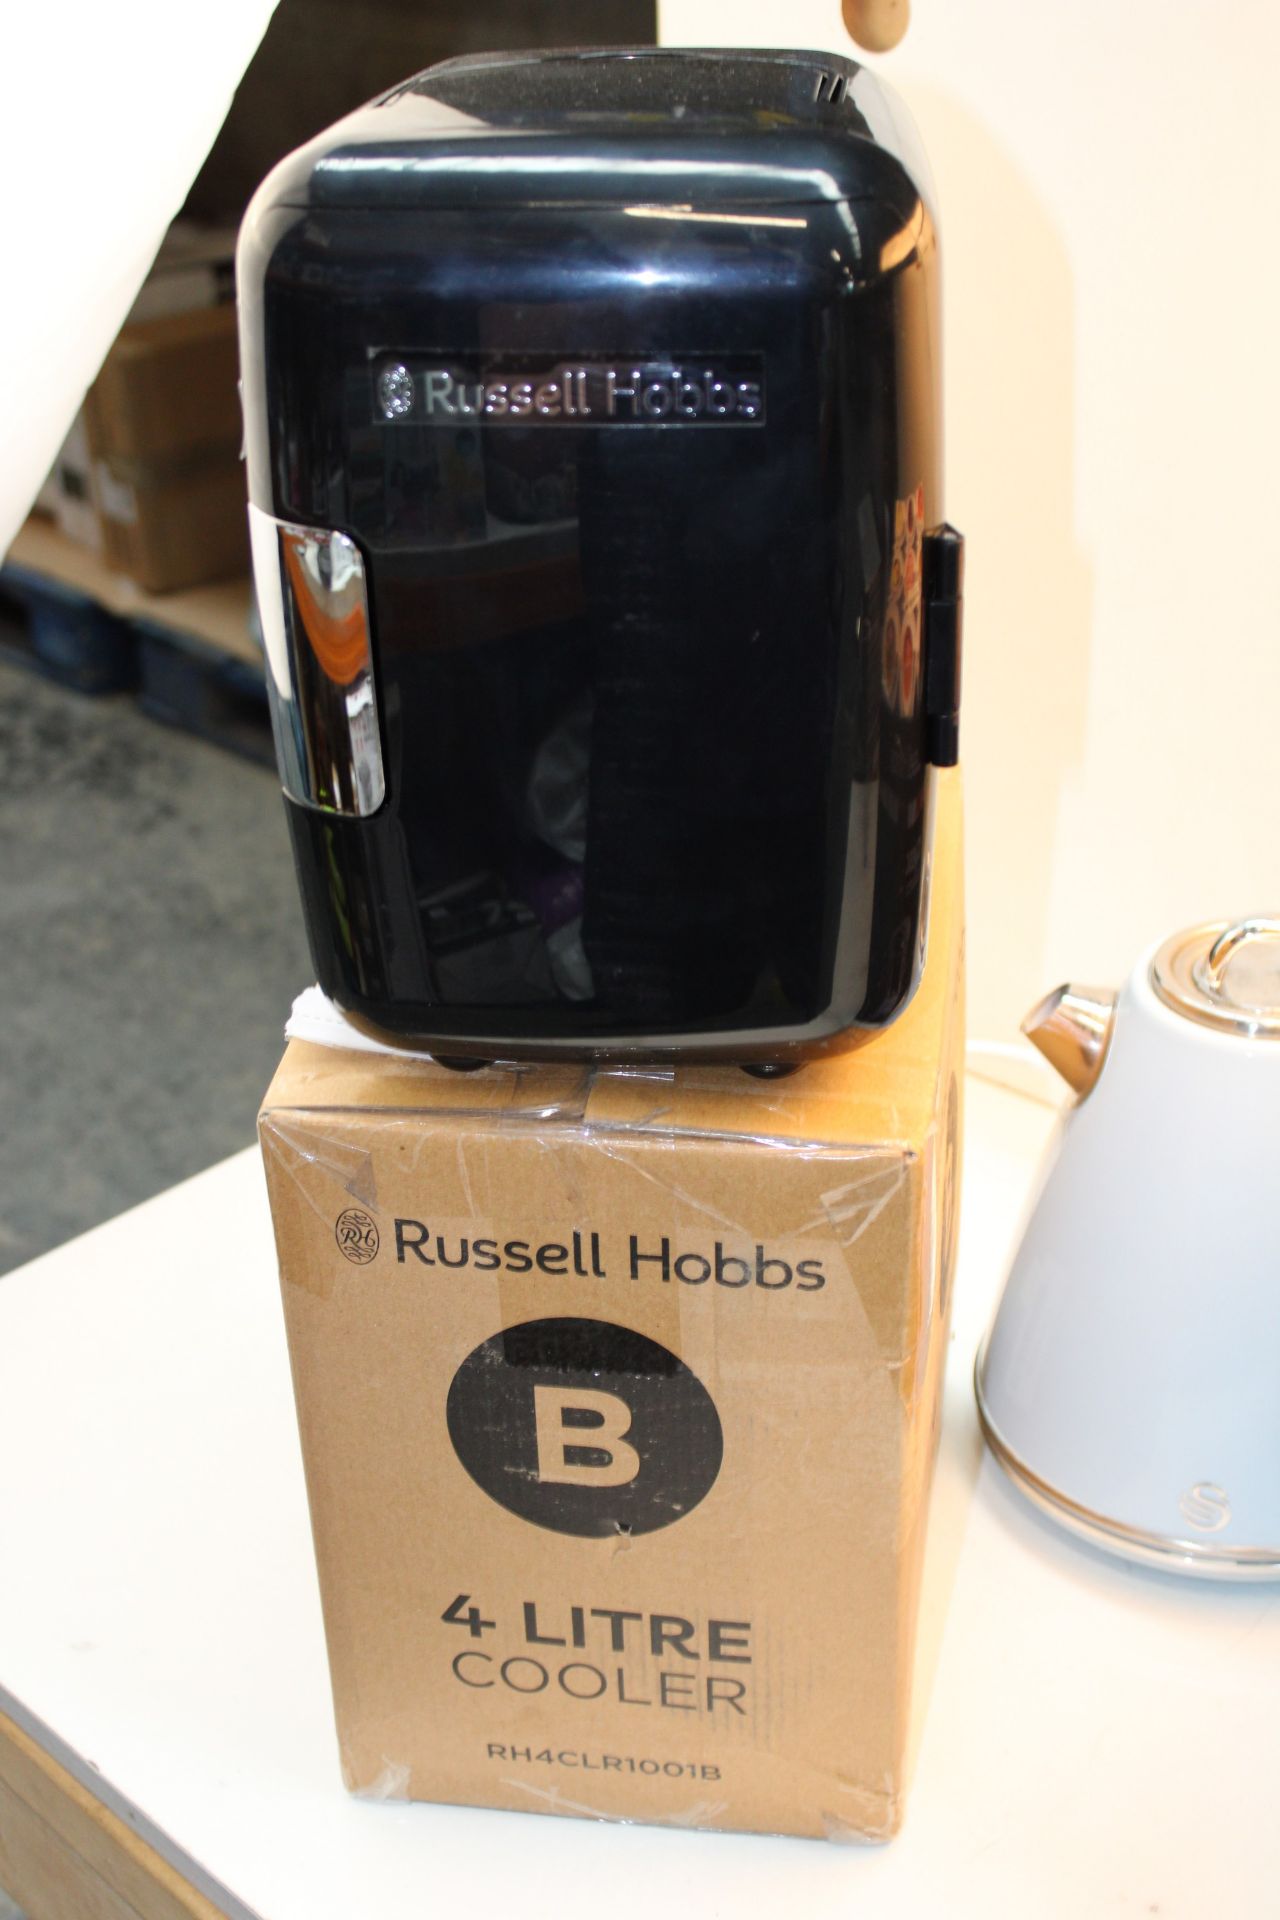 2X BOXED/UNBOXED RUSSELL HOBBS 4 LITRE COOLERS Condition ReportAppraisal Available on Request- All